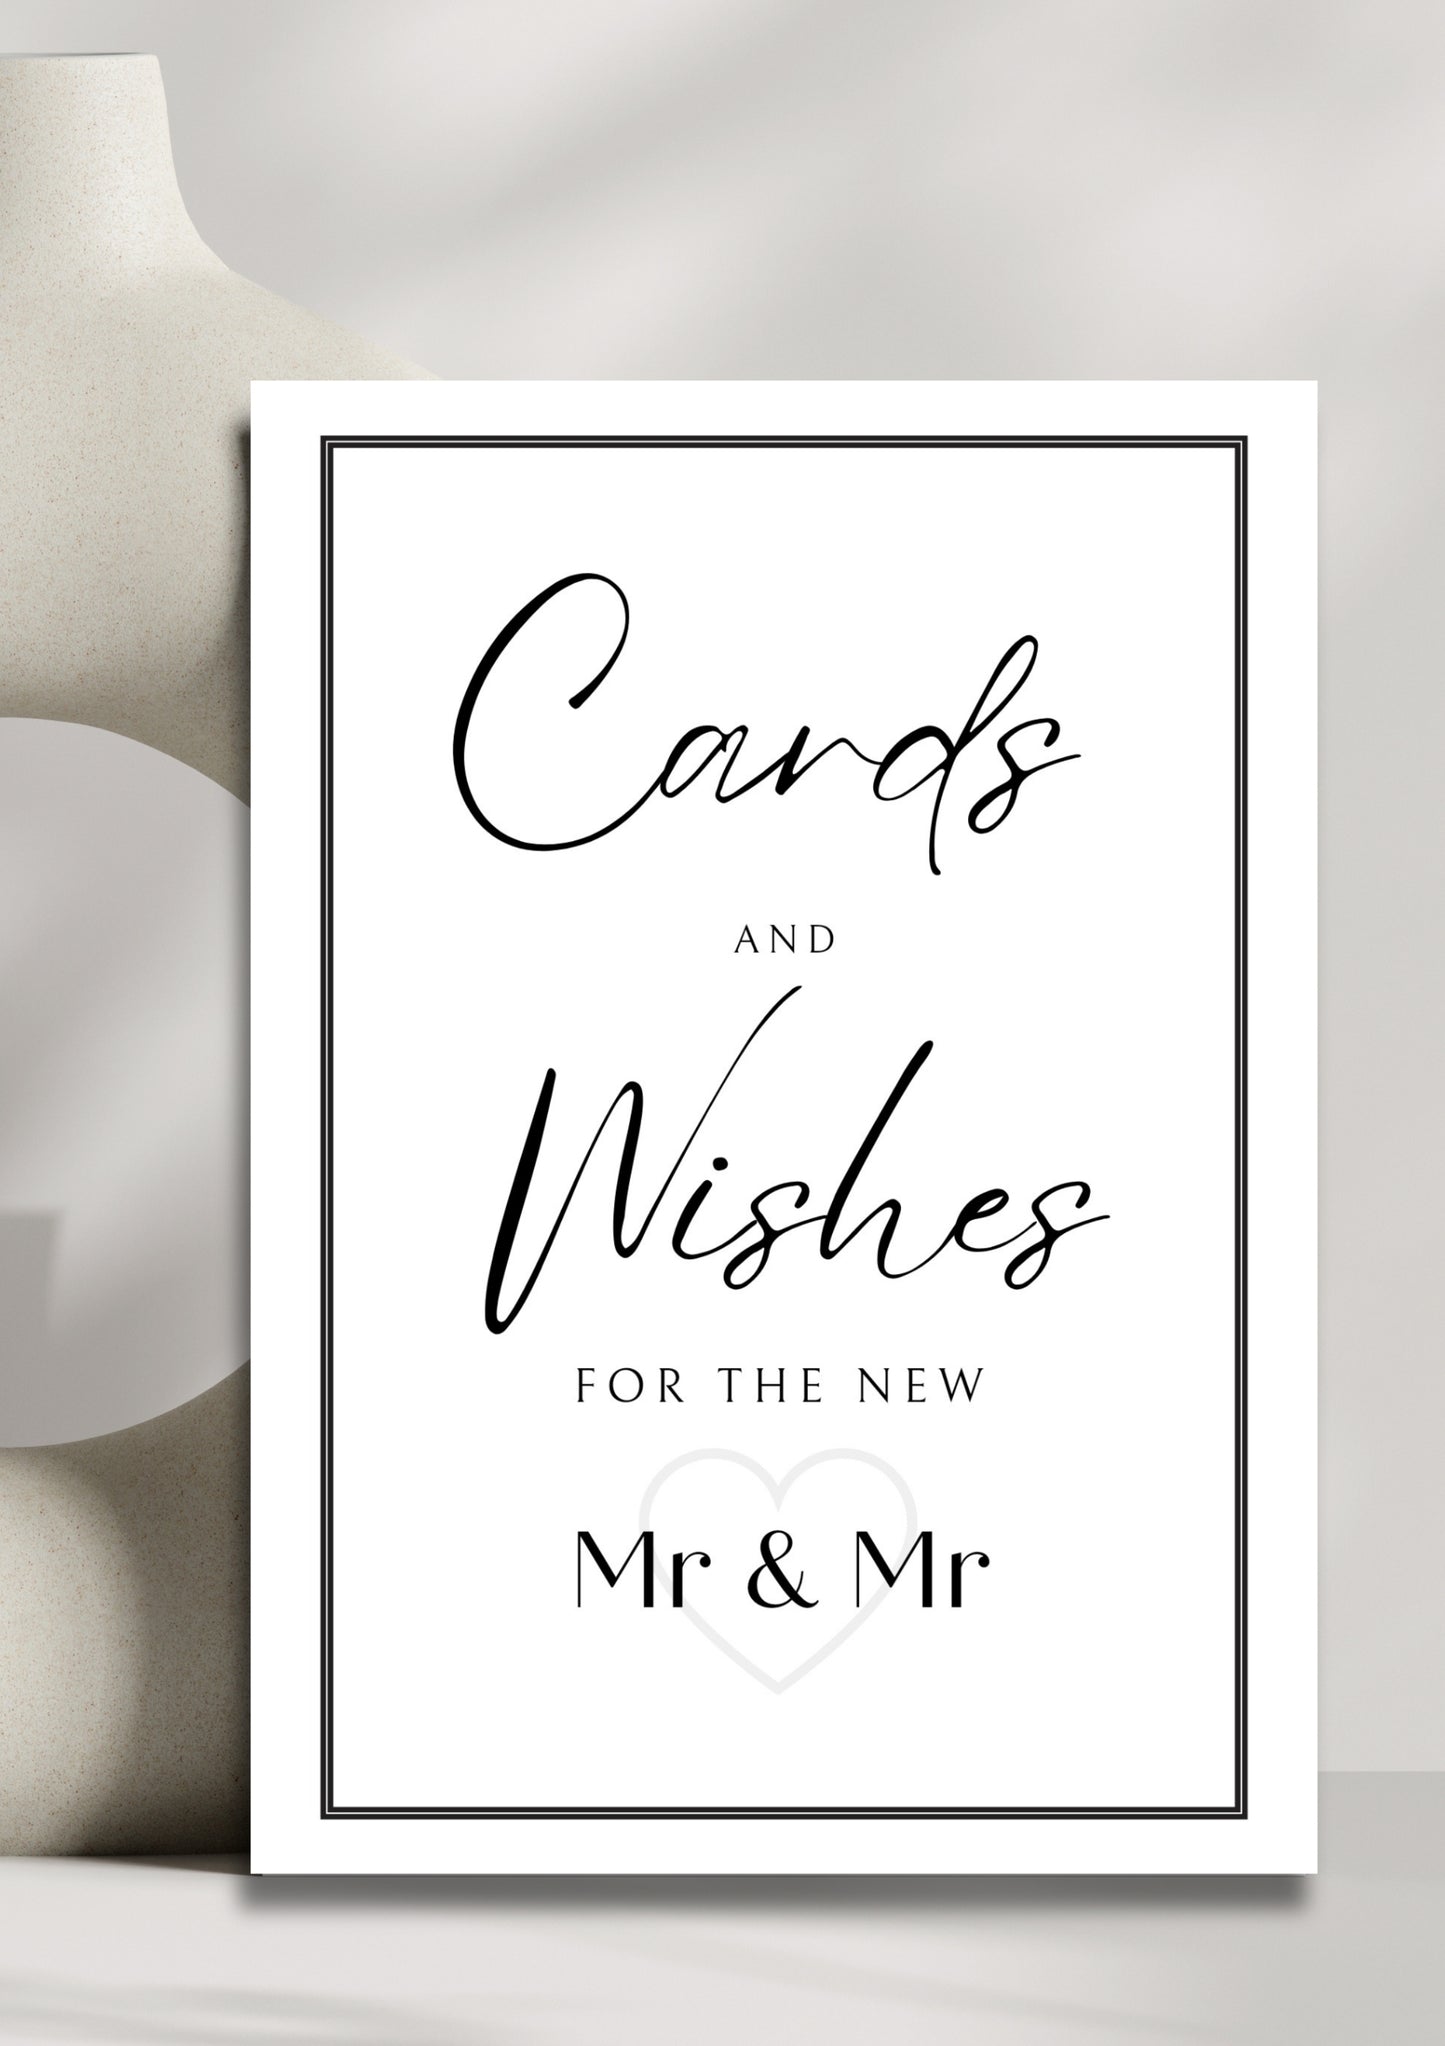 White stone collection - Cards & Wishes (Mr & Mr)